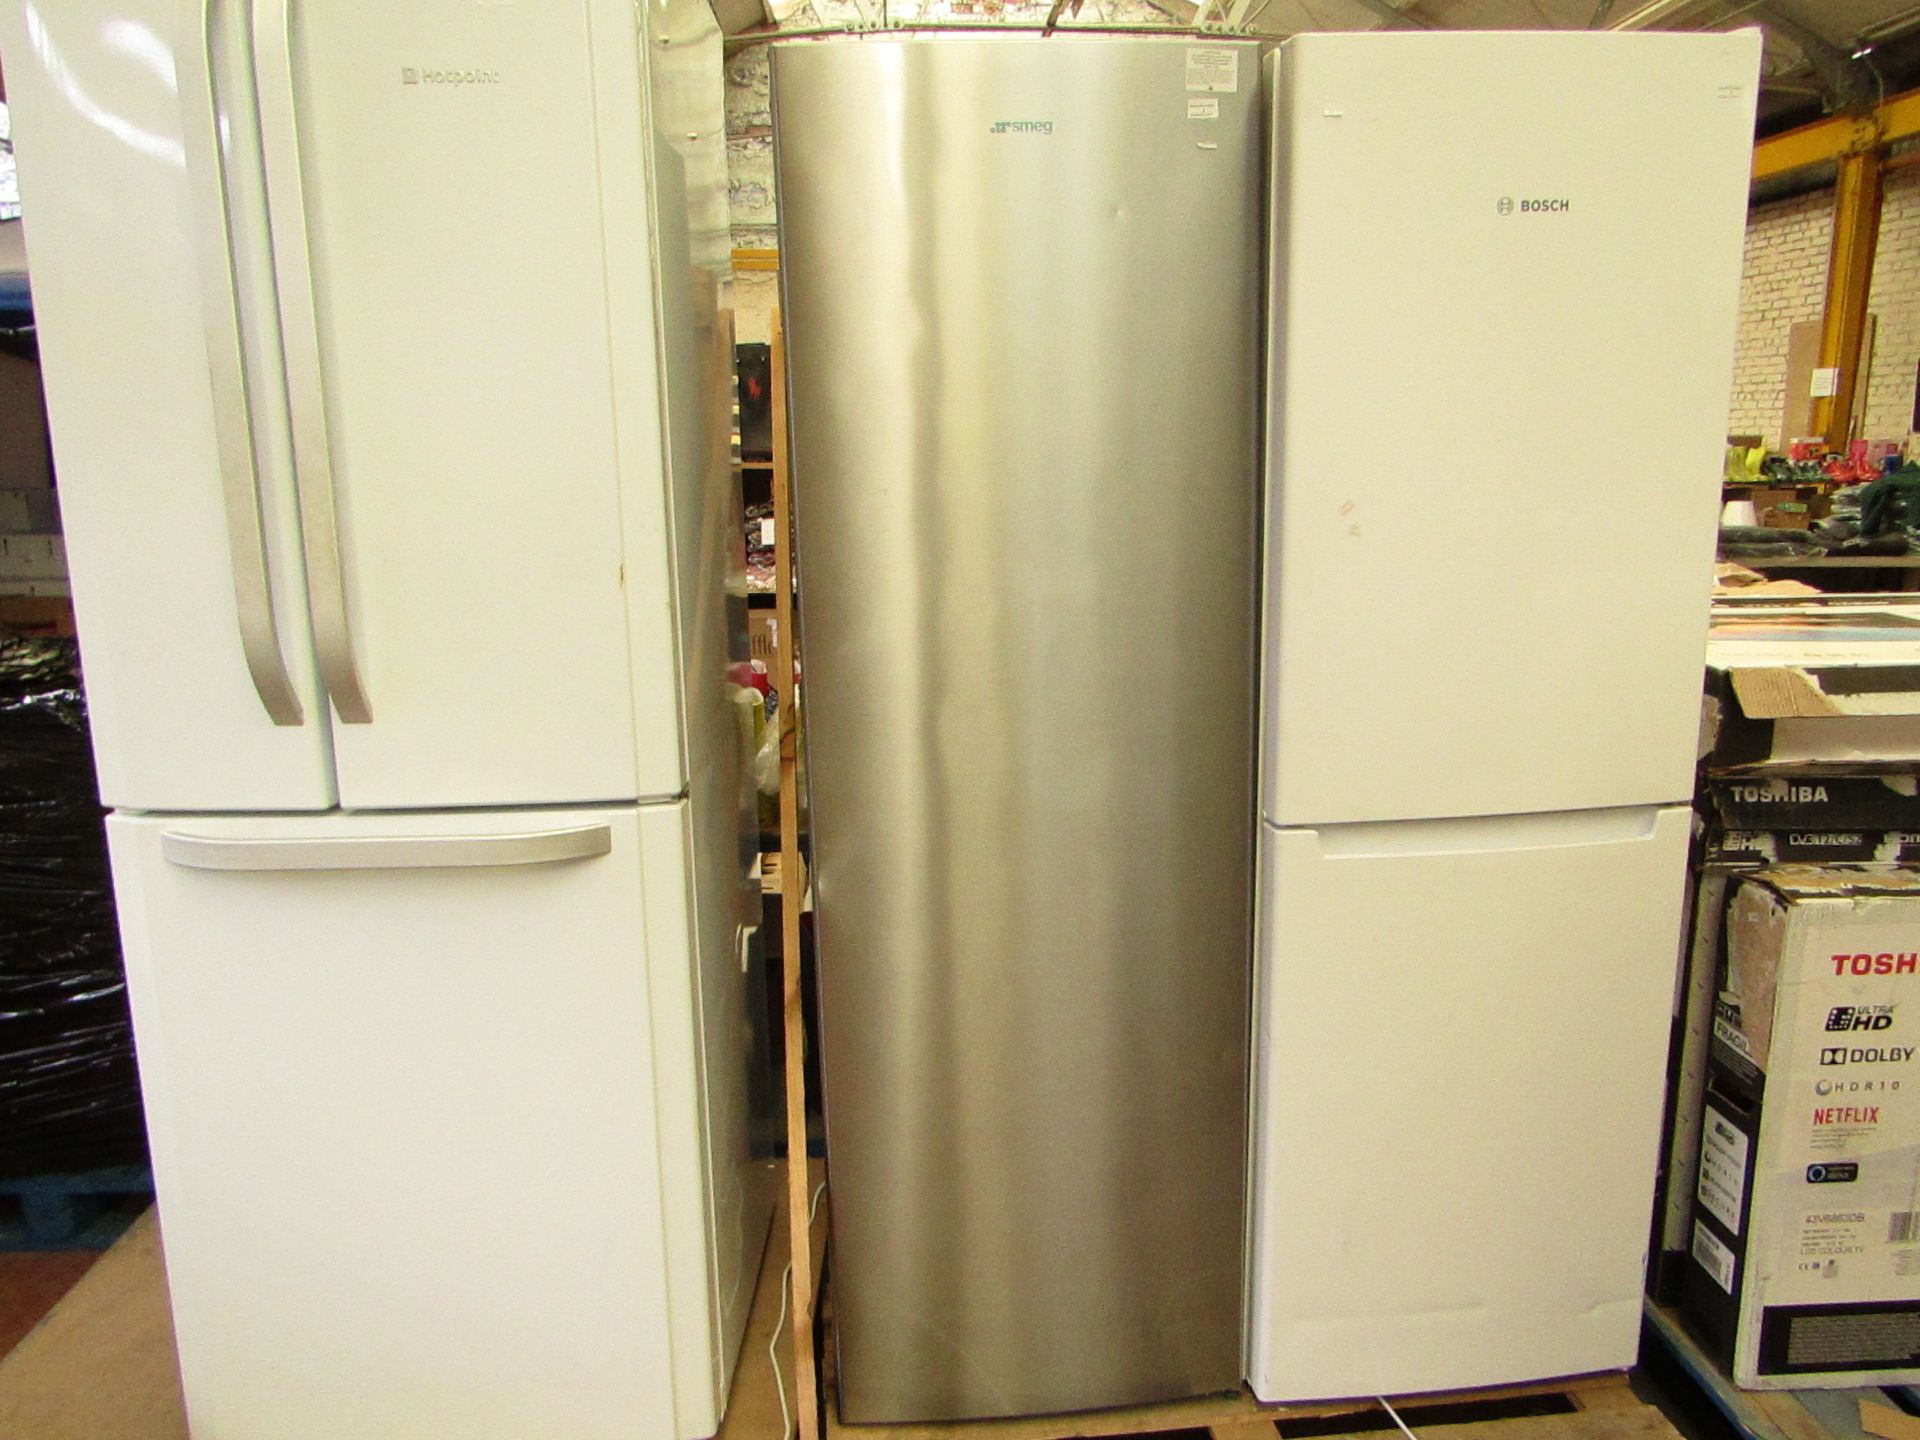 Smeg Tall Standing Fridge.Tested working but needs a new handle